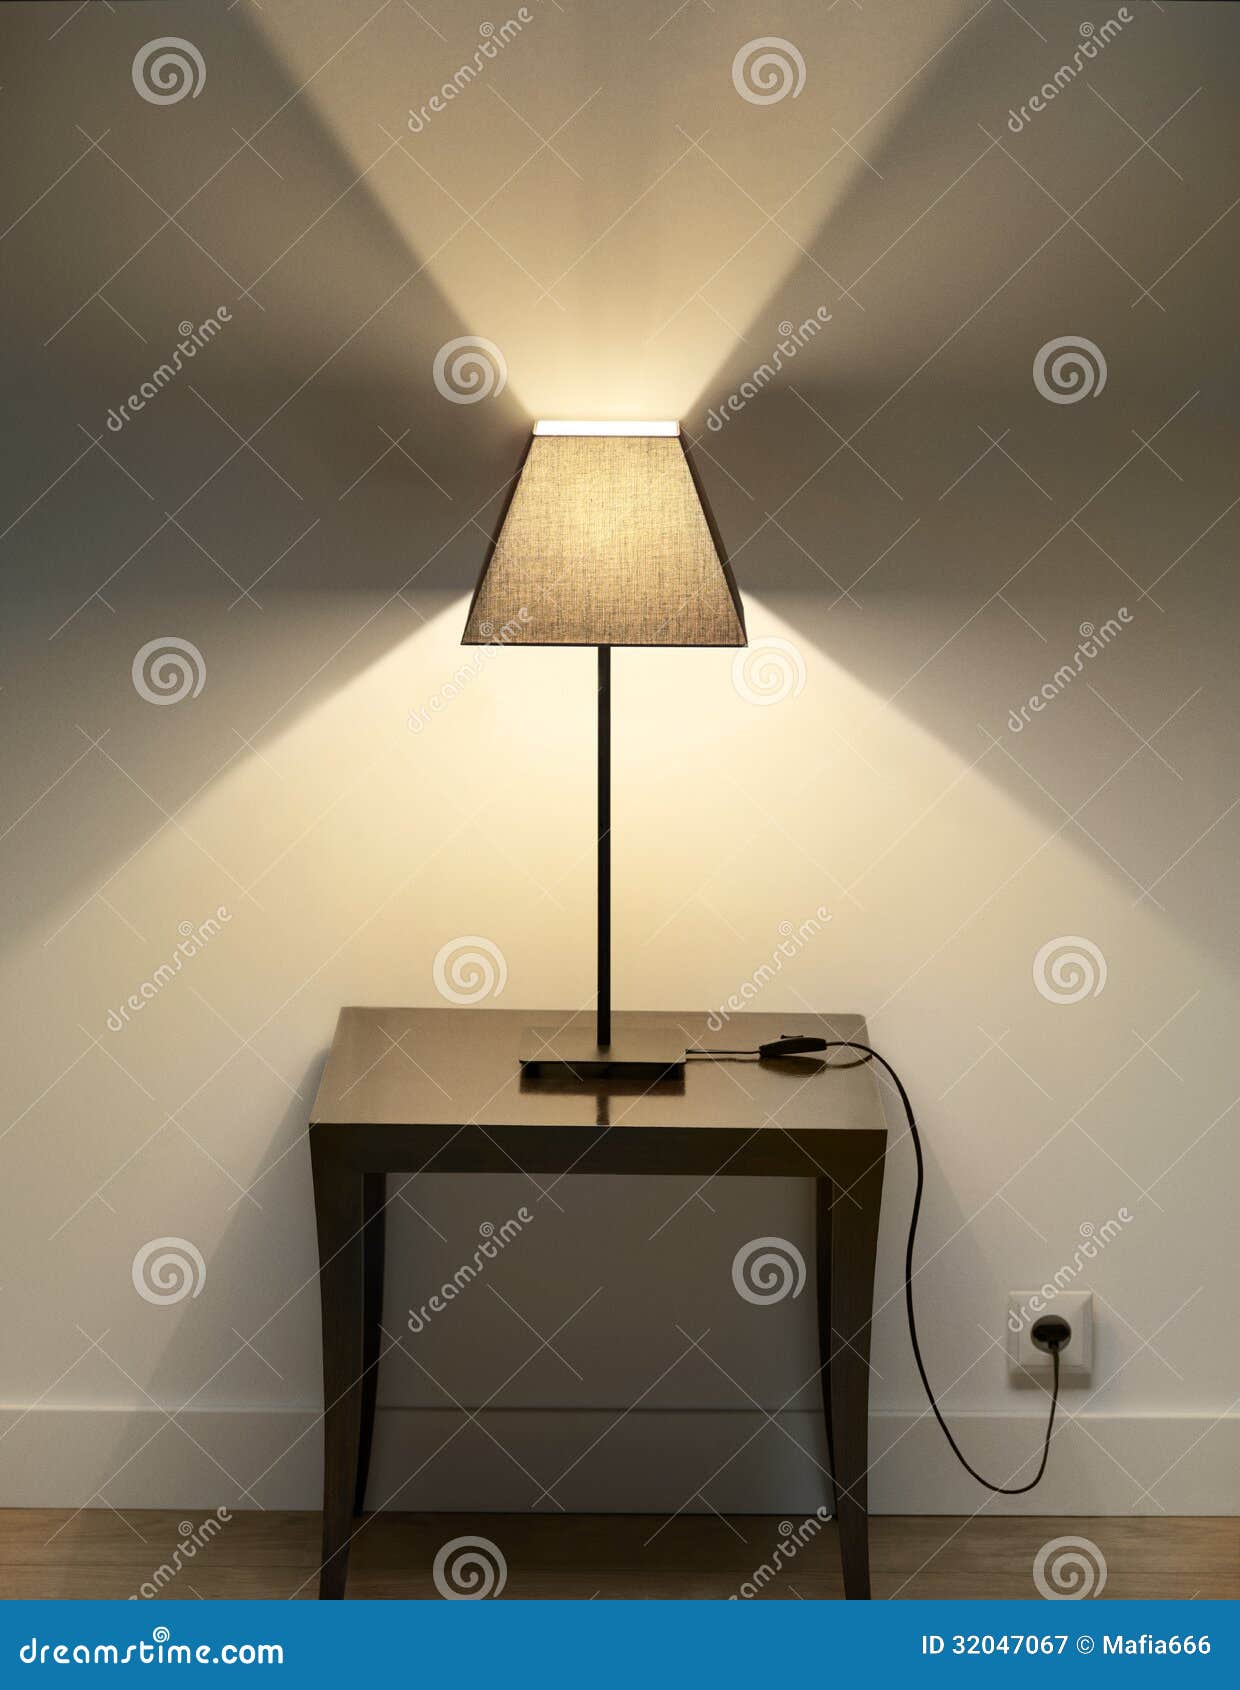 Lamp with small table stock image. Image of night, light 